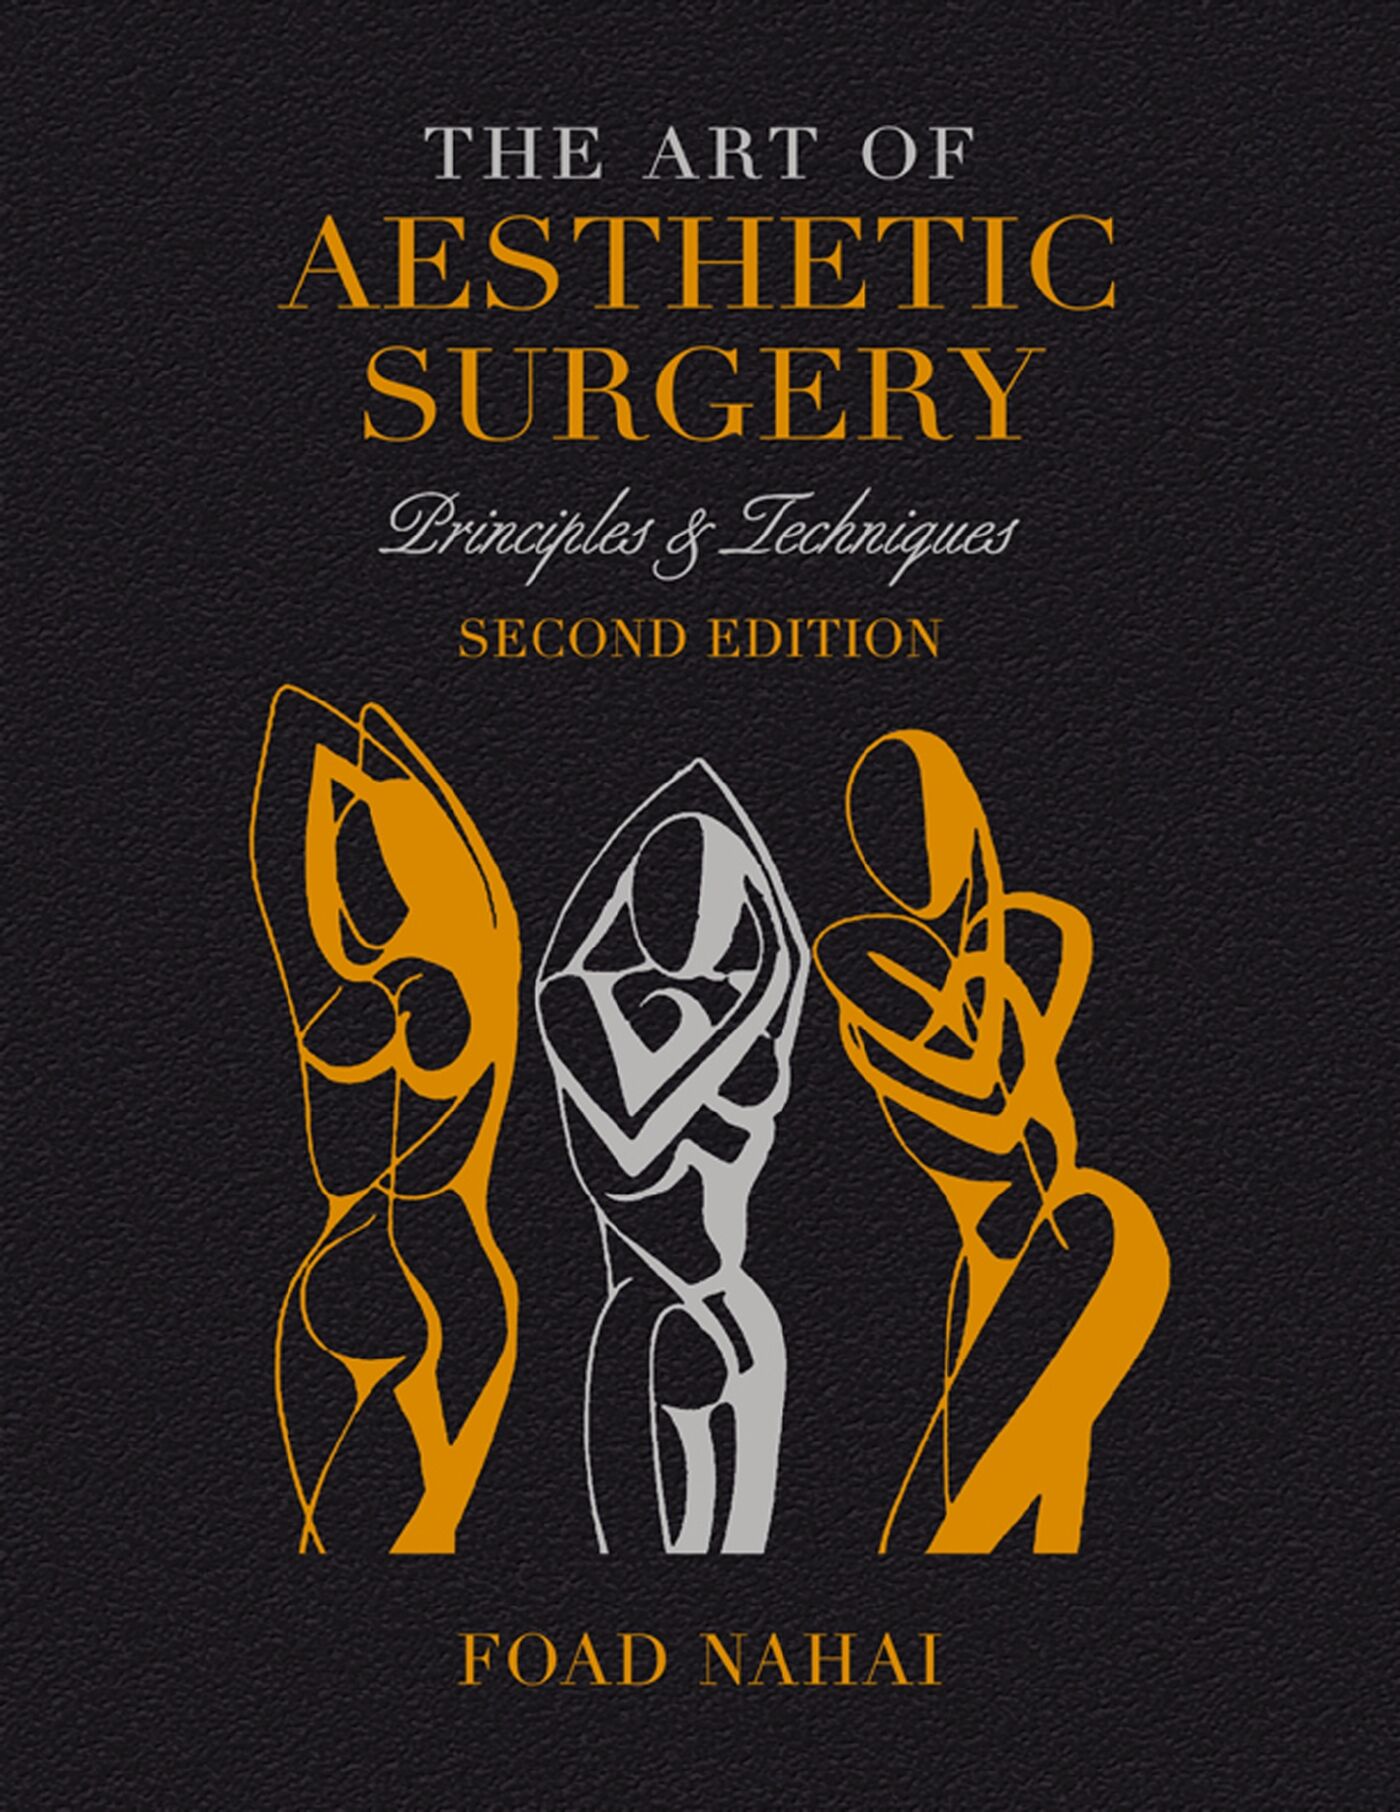 The Art of Aesthetic Surgery: Fundamentals and Minimally Invasive Surgery - Volume 1, Second Edition, 9781626236257